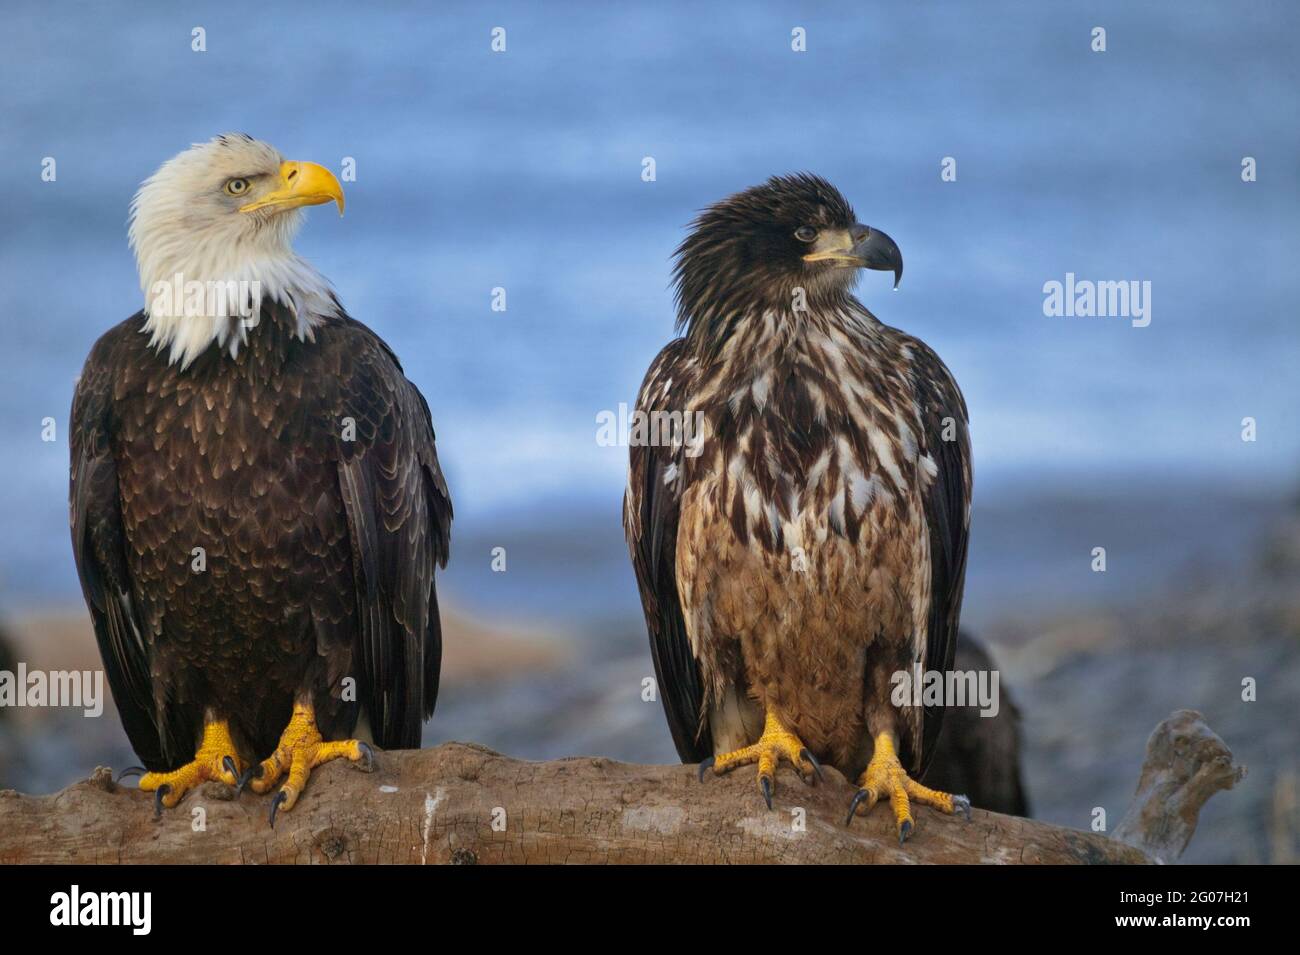 Adult and juvenile bald eagle sitting side by side along a beach on Vancouver Island, British Columbia, Canada Stock Photo